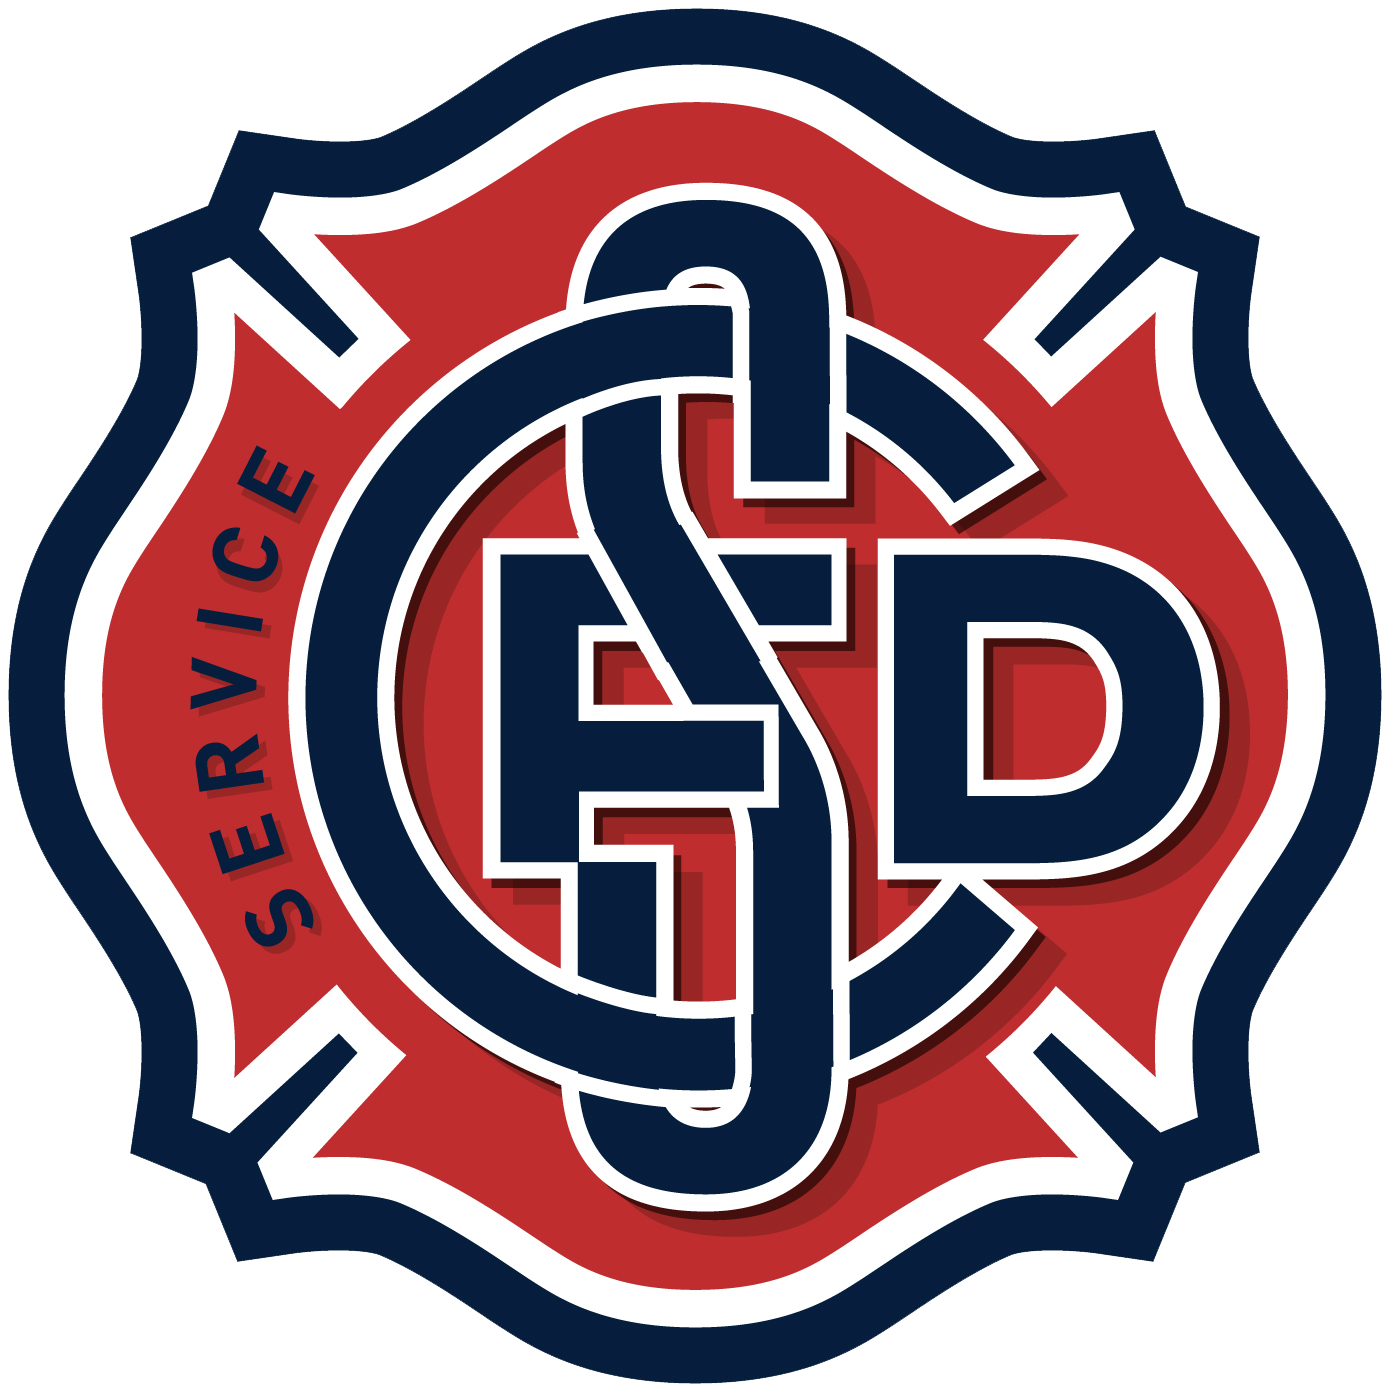 Firefighter Logo Clip Art Click To View